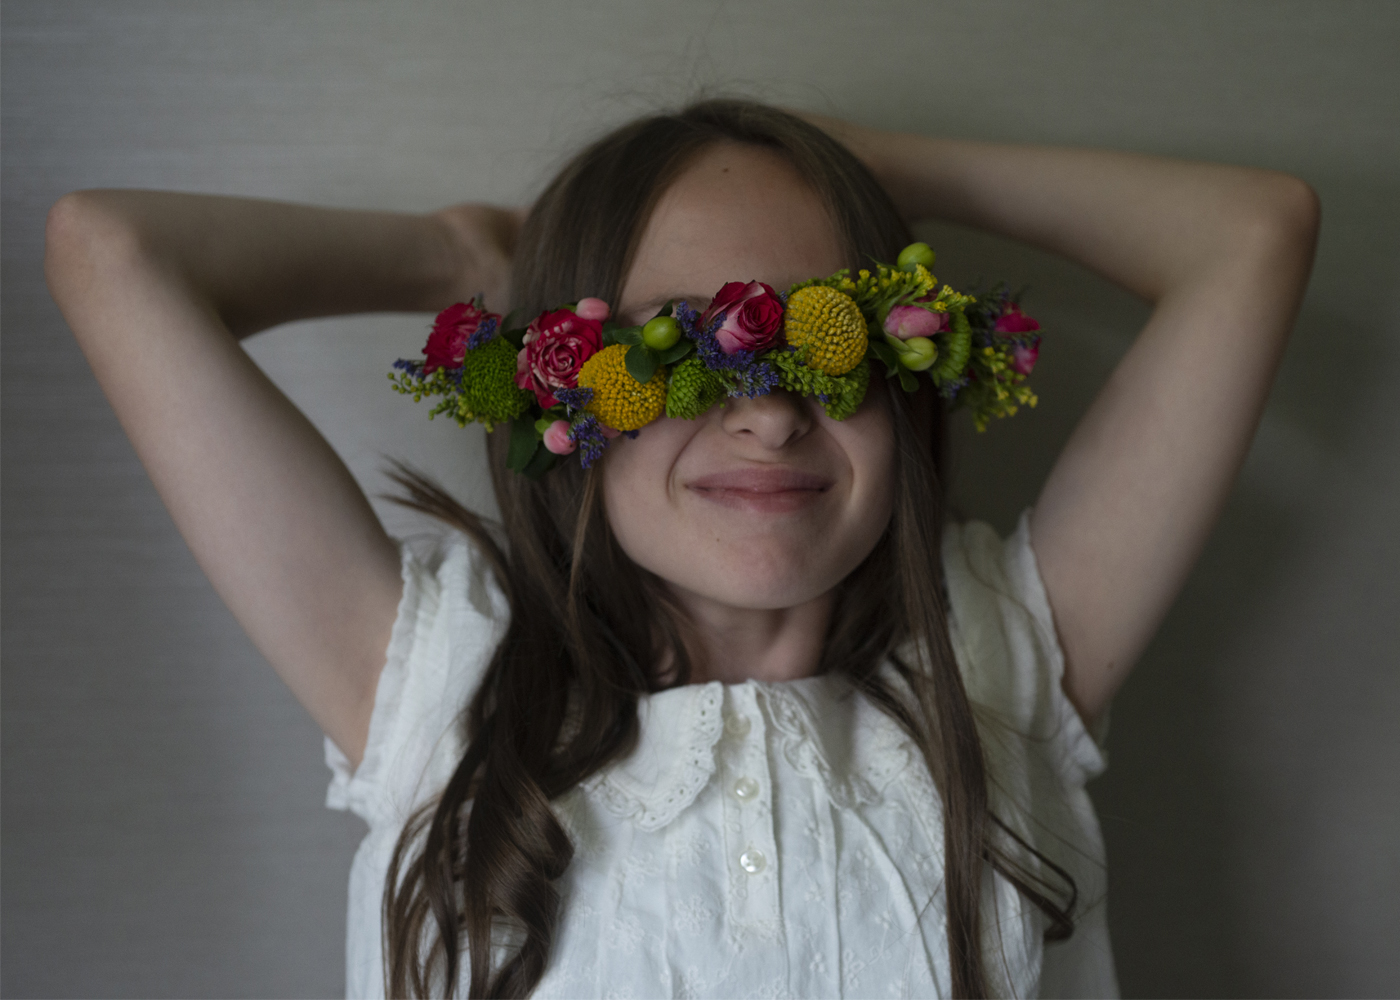 young girl smiling with flower crown in front of her eyes